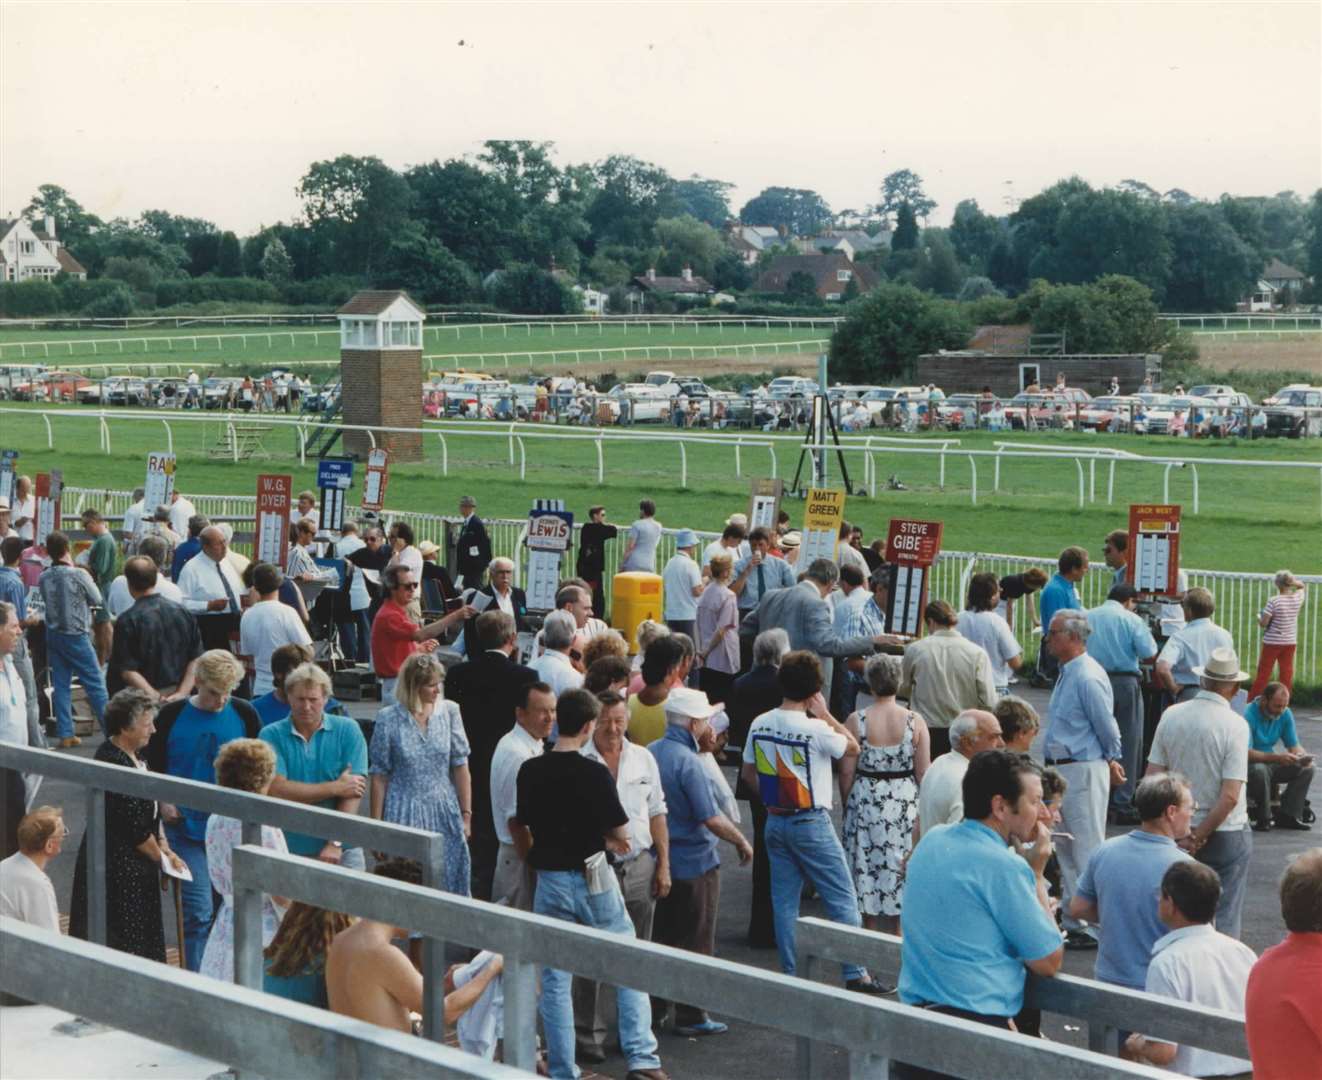 Crowds at Folkestone Racecourse in 1991